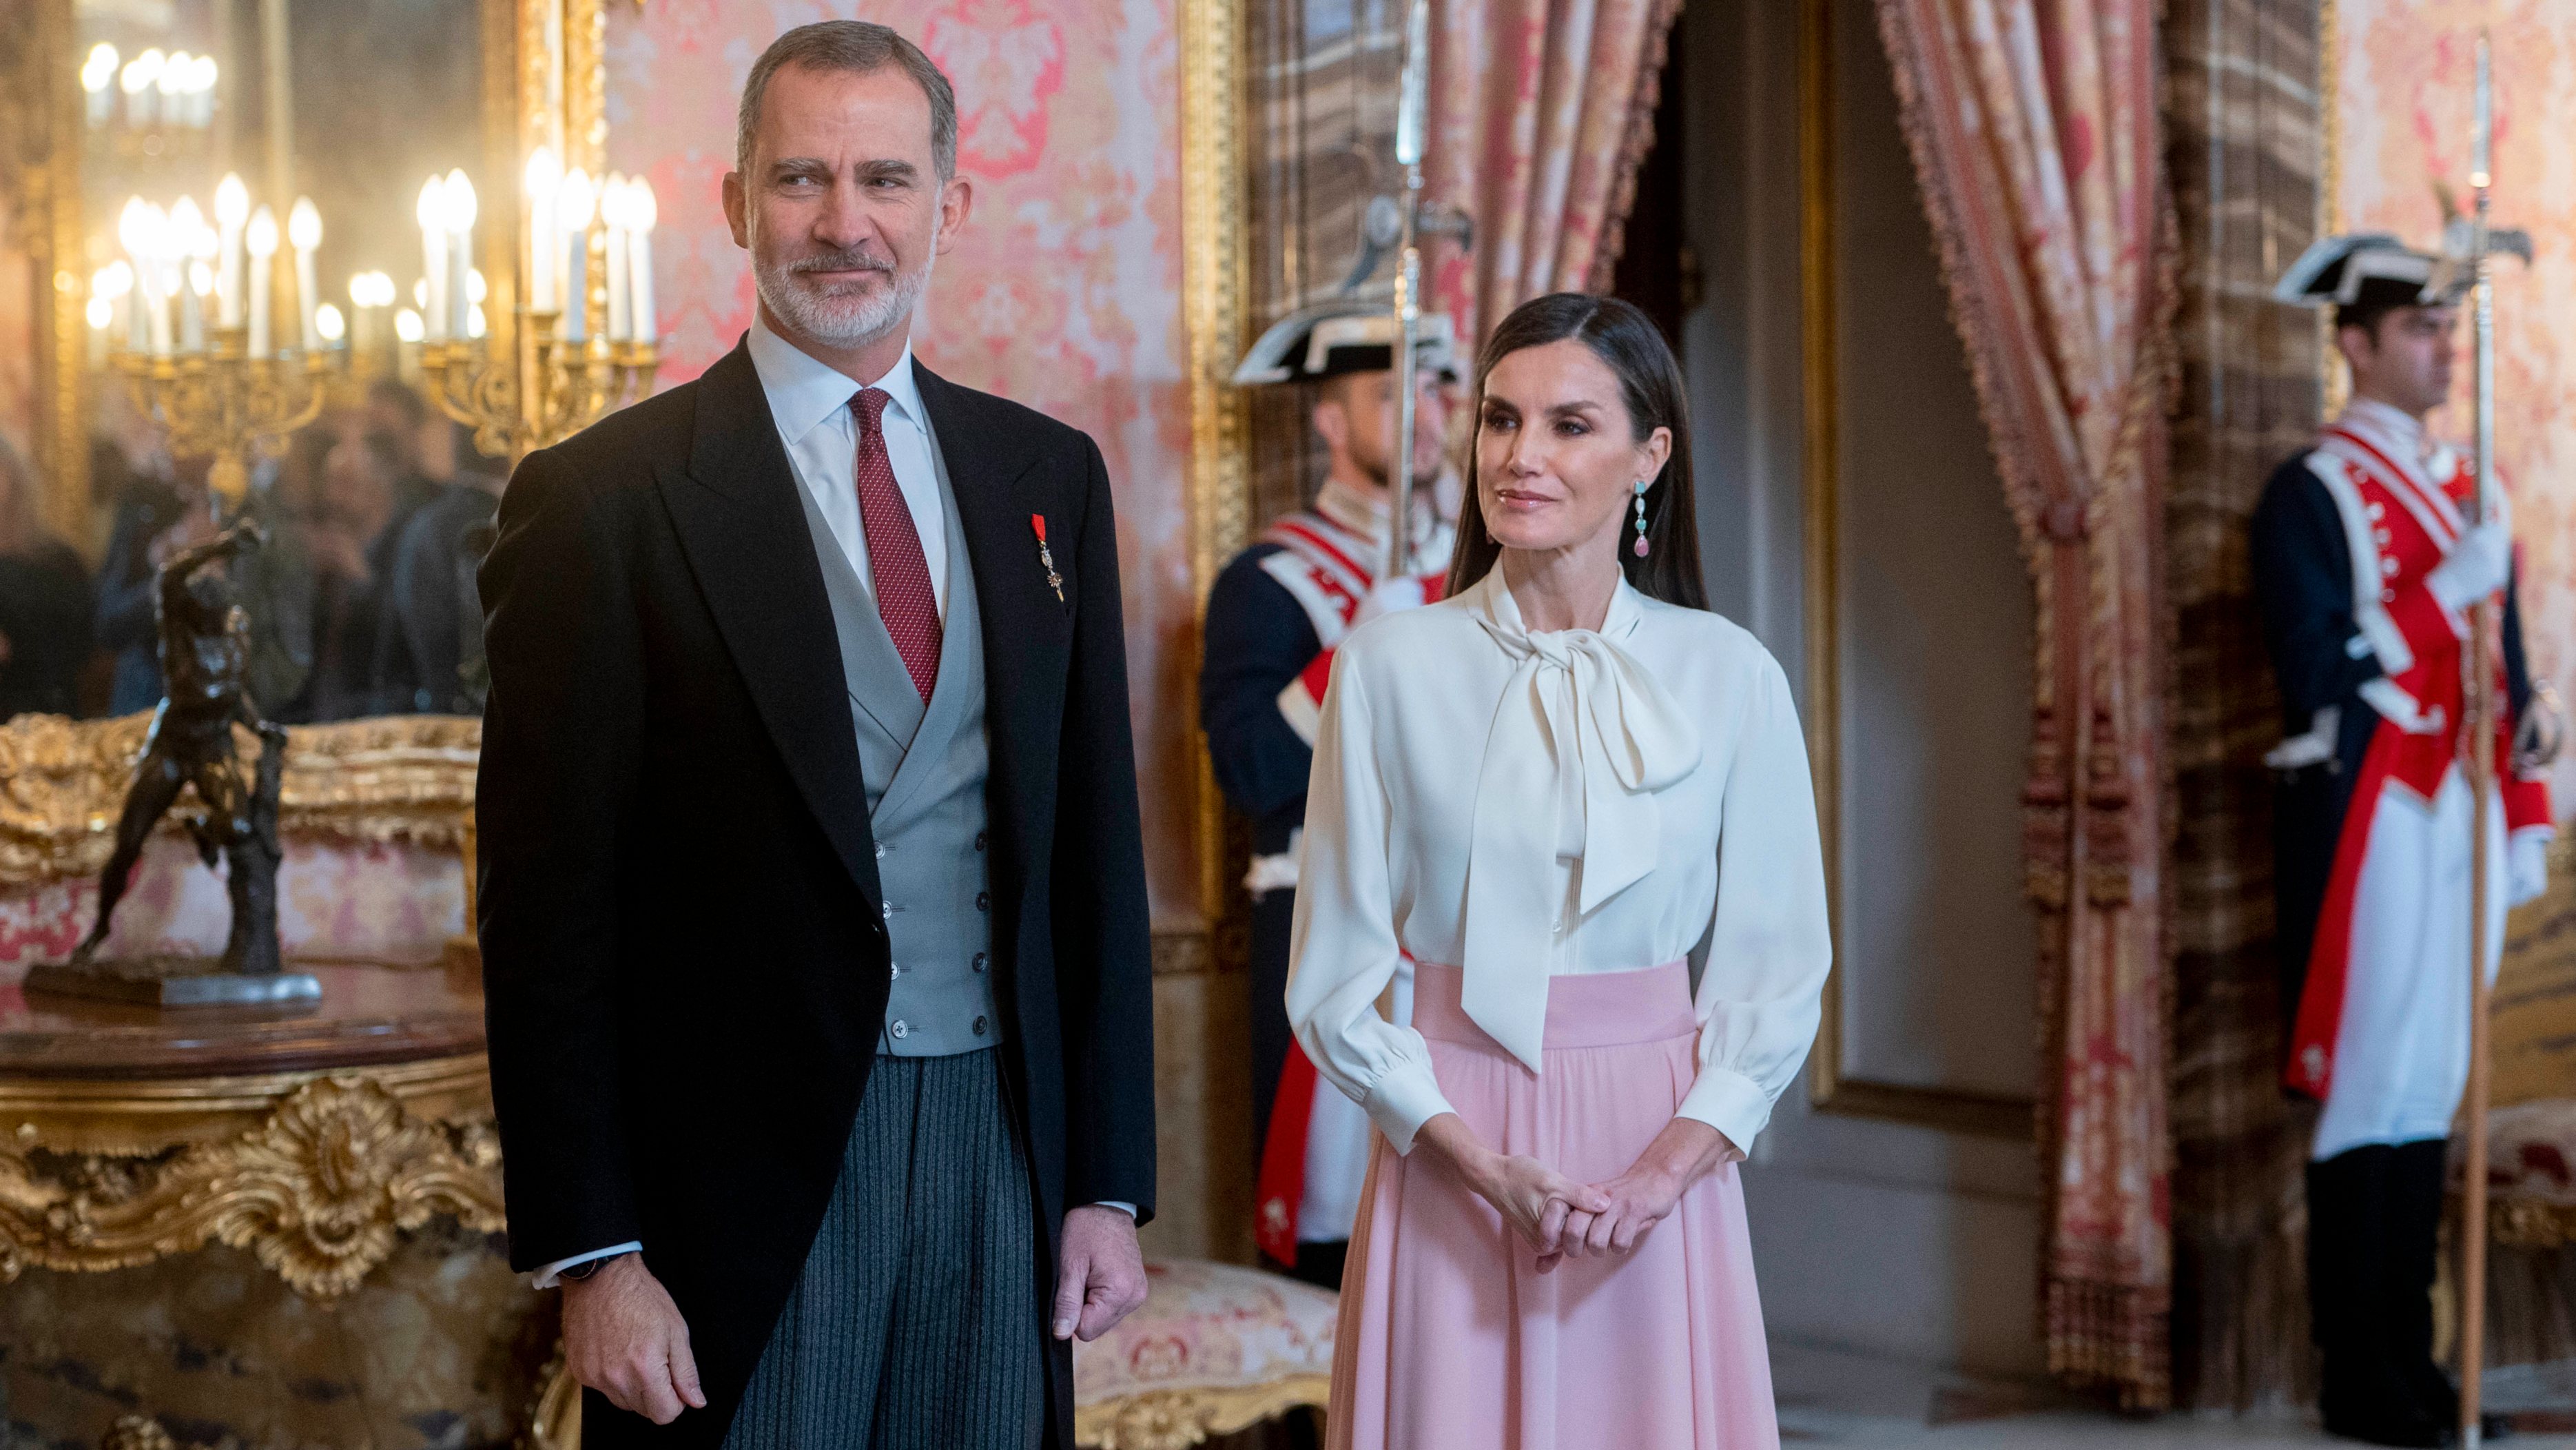 The King And Queen Of Spain Participate In The Annual Reception Of The Diplomatic Corps Accredited In Spain.